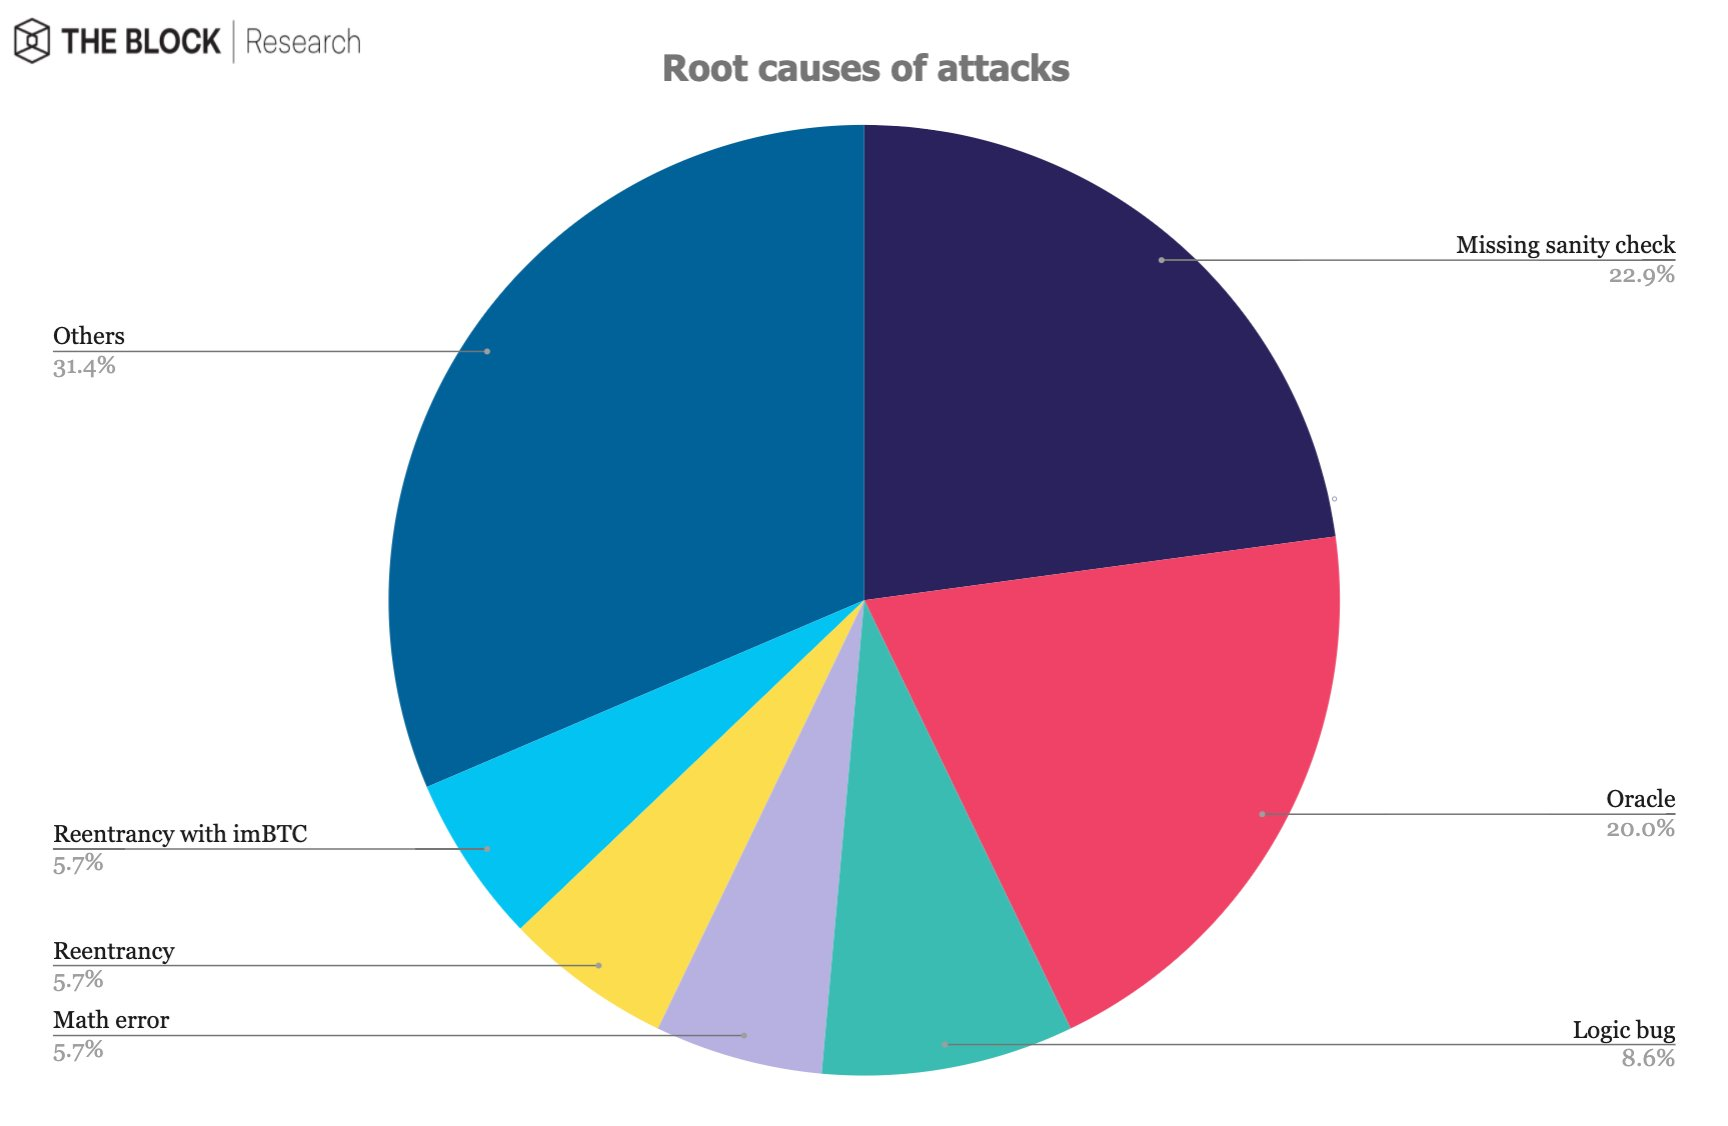 Major risks root causes of attacks